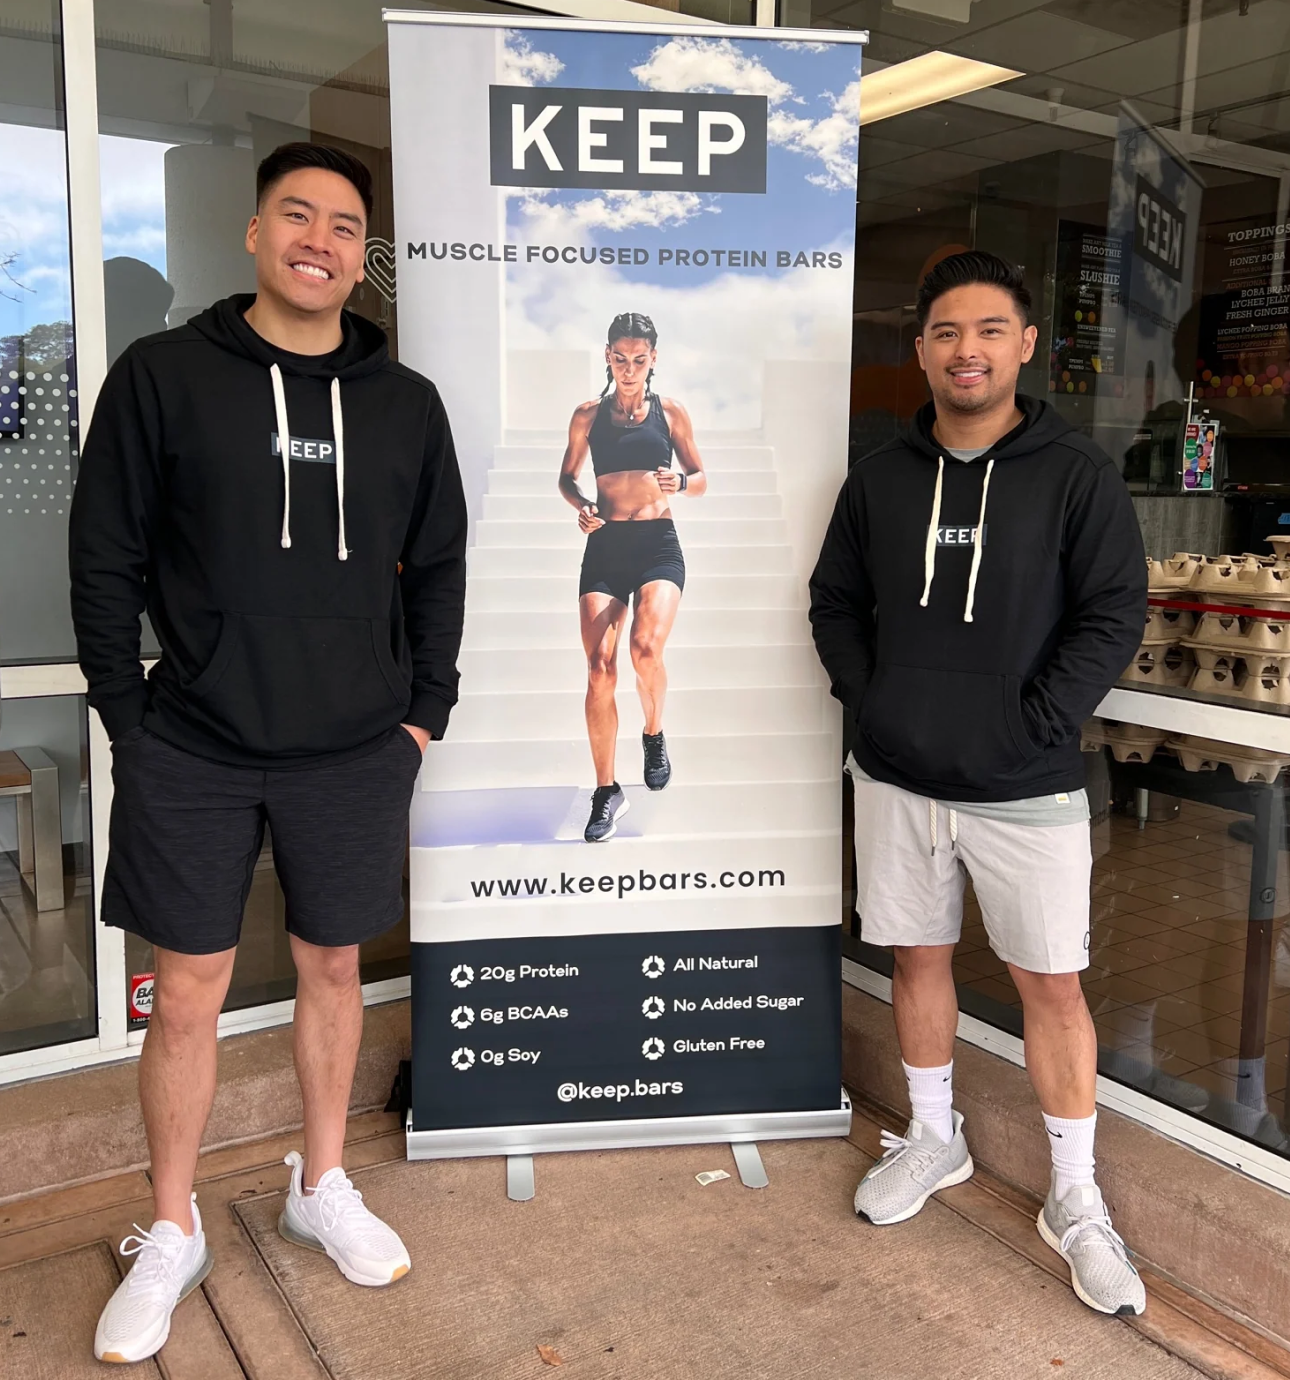 The owners of Keep Bars in front of a keep bar banner